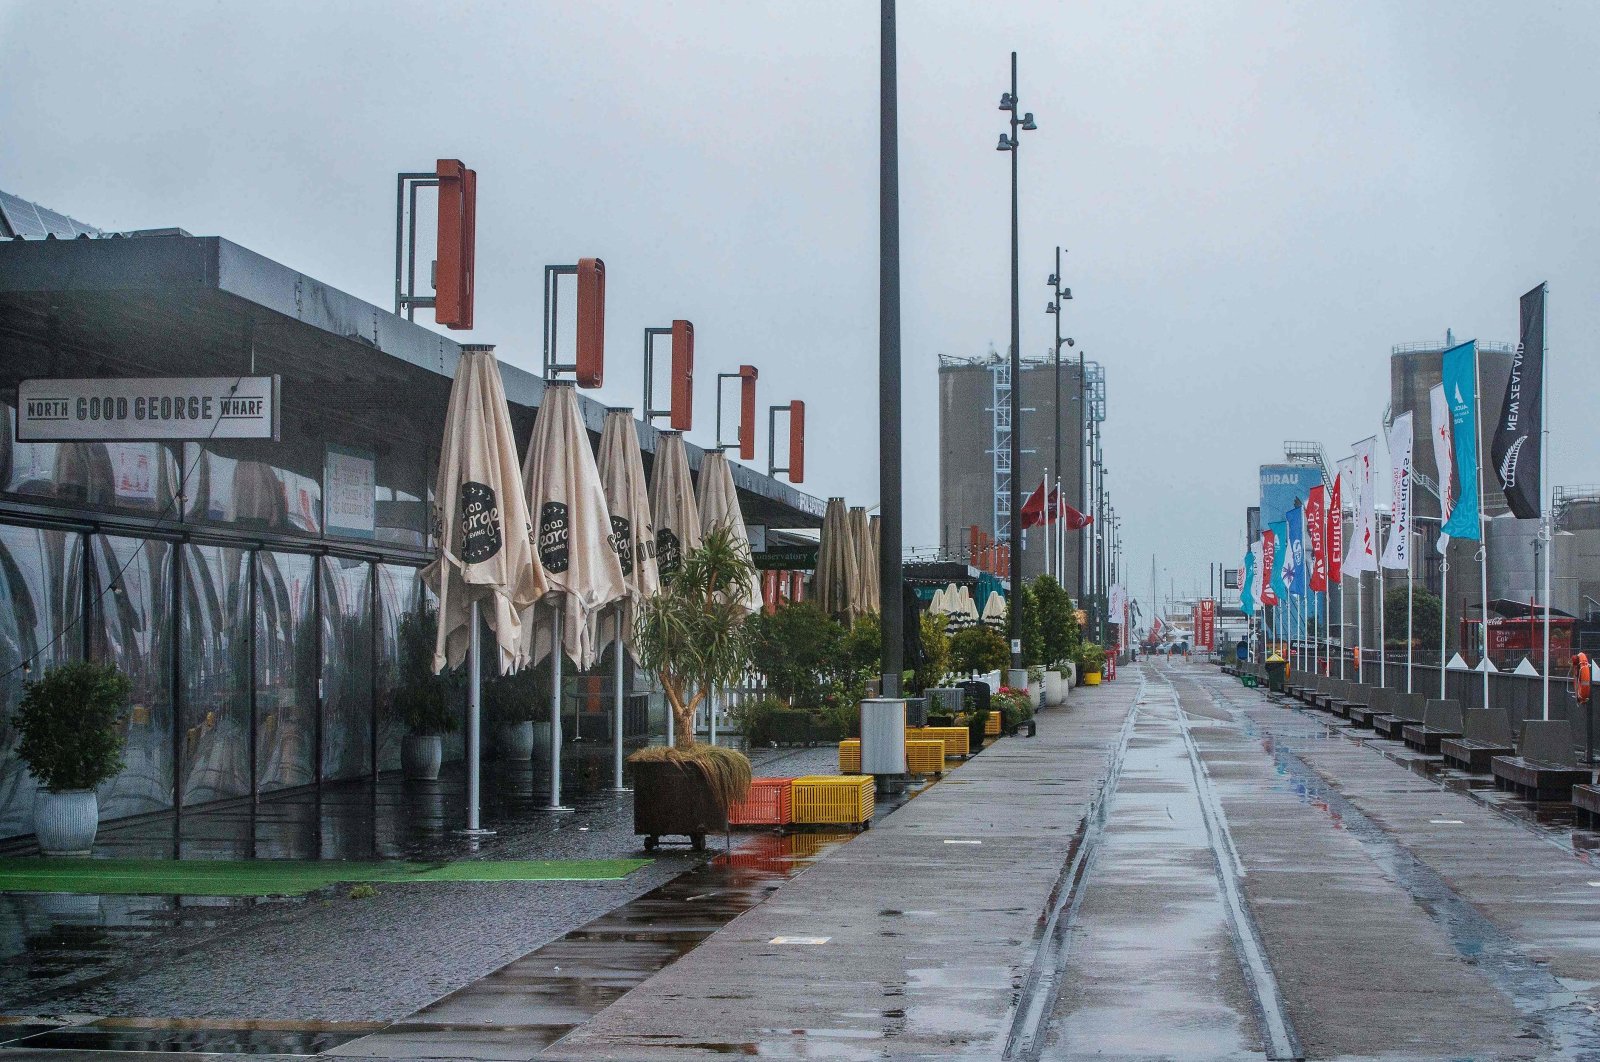 The restaurant and bar area of Wynyard Quarter, normally busy with America Cup crowds, is deserted as the city enters a level 3 lockdown in Auckland, New Zealand, on Feb.15, 2021. (AFP Photo)